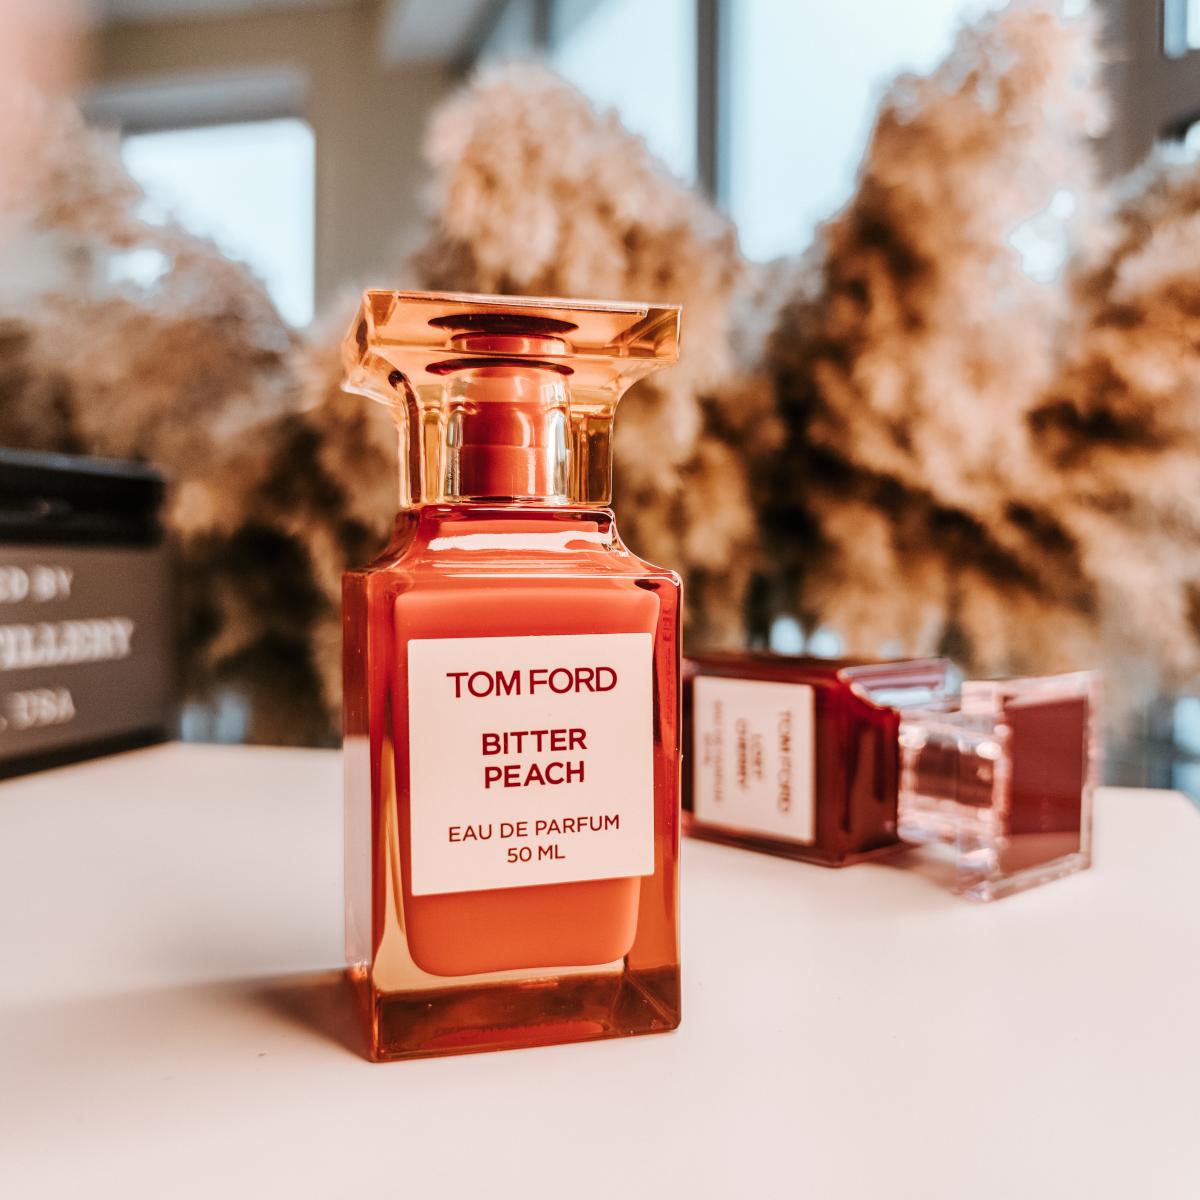 Bitter Peach Tom Ford perfume - a new fragrance for women and men 2020